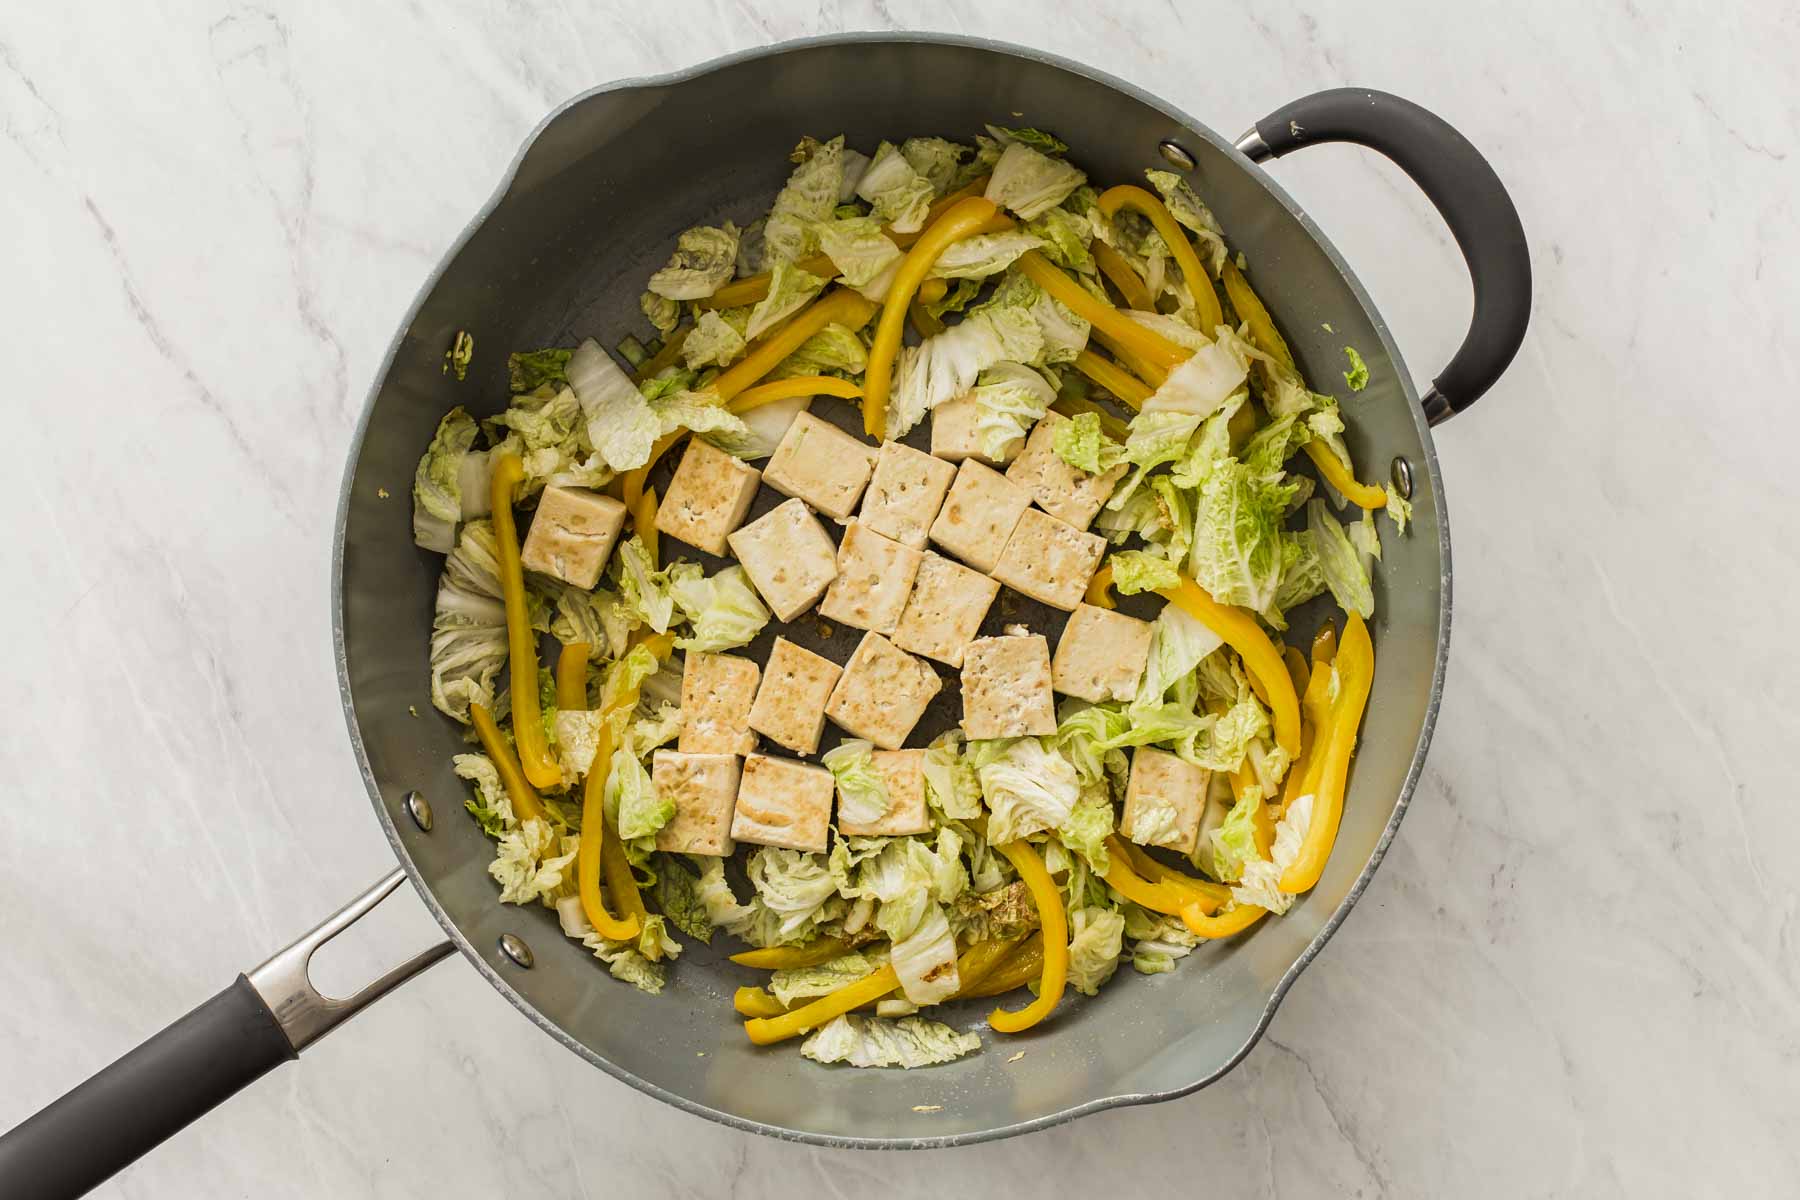 Adding tofu cubes to a skillet with stir fry vegetables.